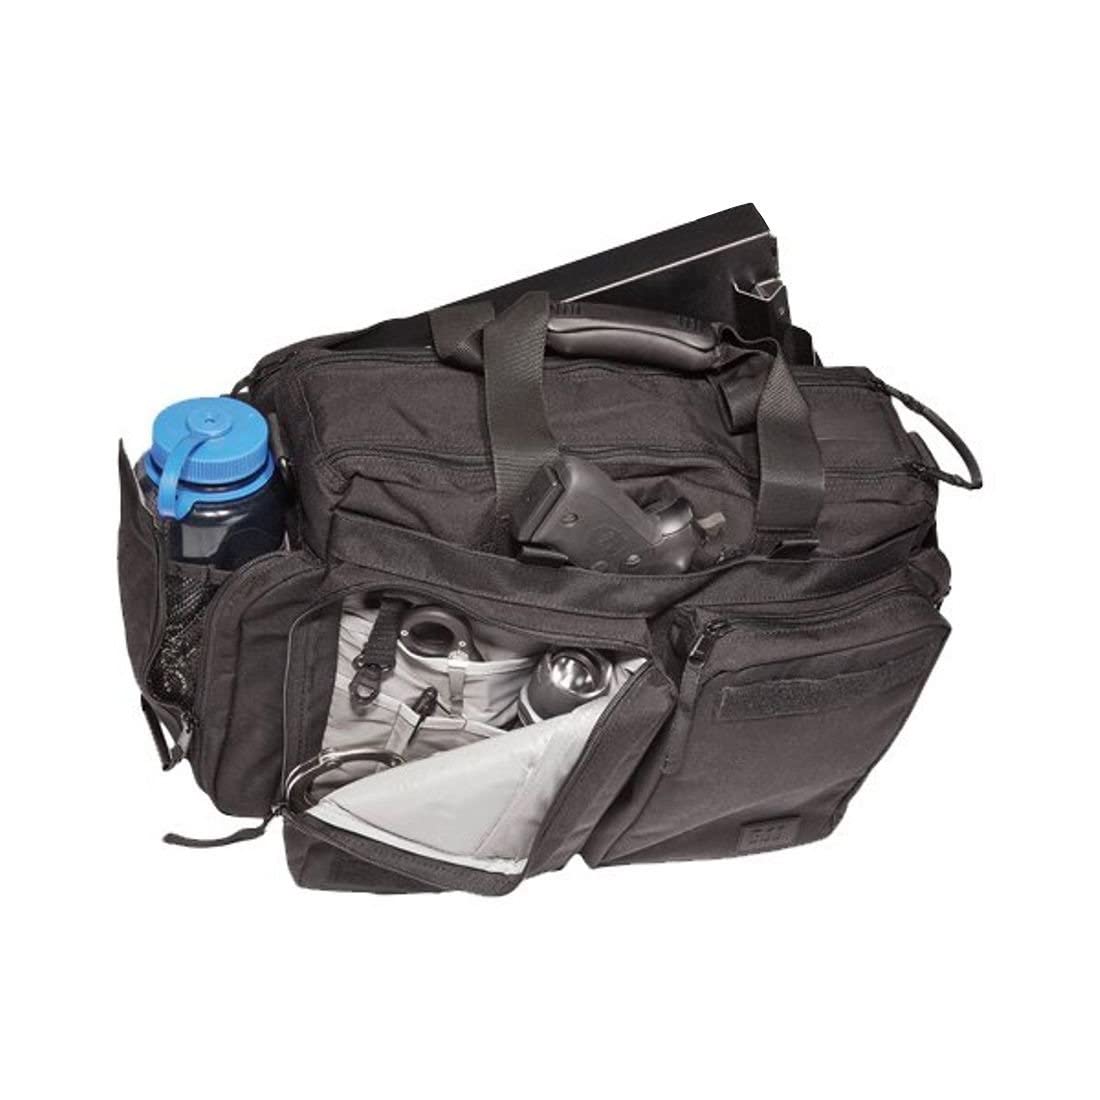 5.11 Tactical.56003 Adult's Side Trip Briefcase